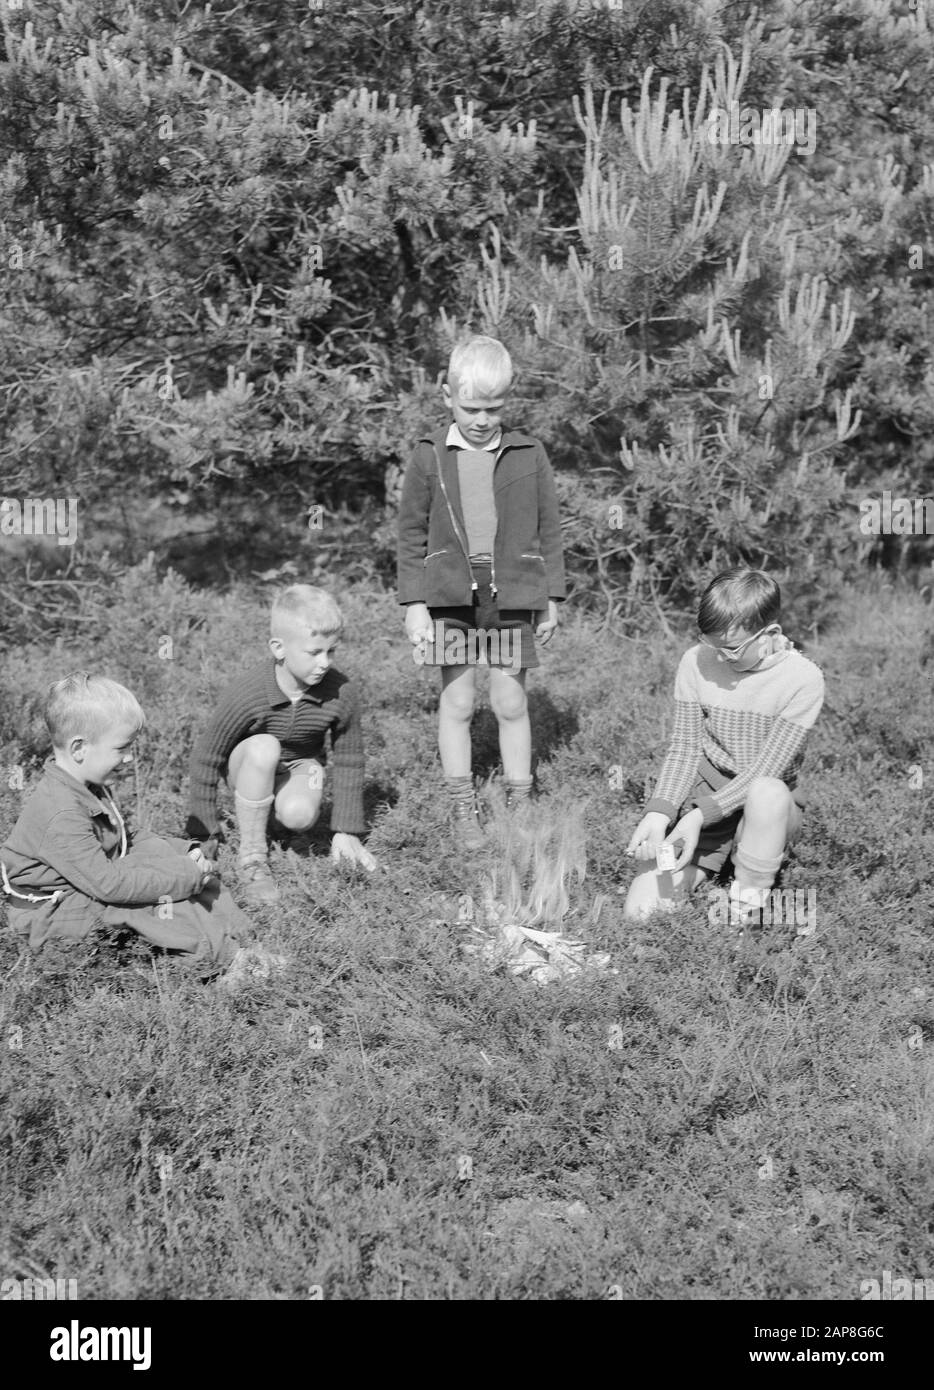 Forest Fire and storm Damage, children, Fire-playing Date: Unundated Keywords: Forest Fire and Storm Damage, children, Fire-playing Foto Stock